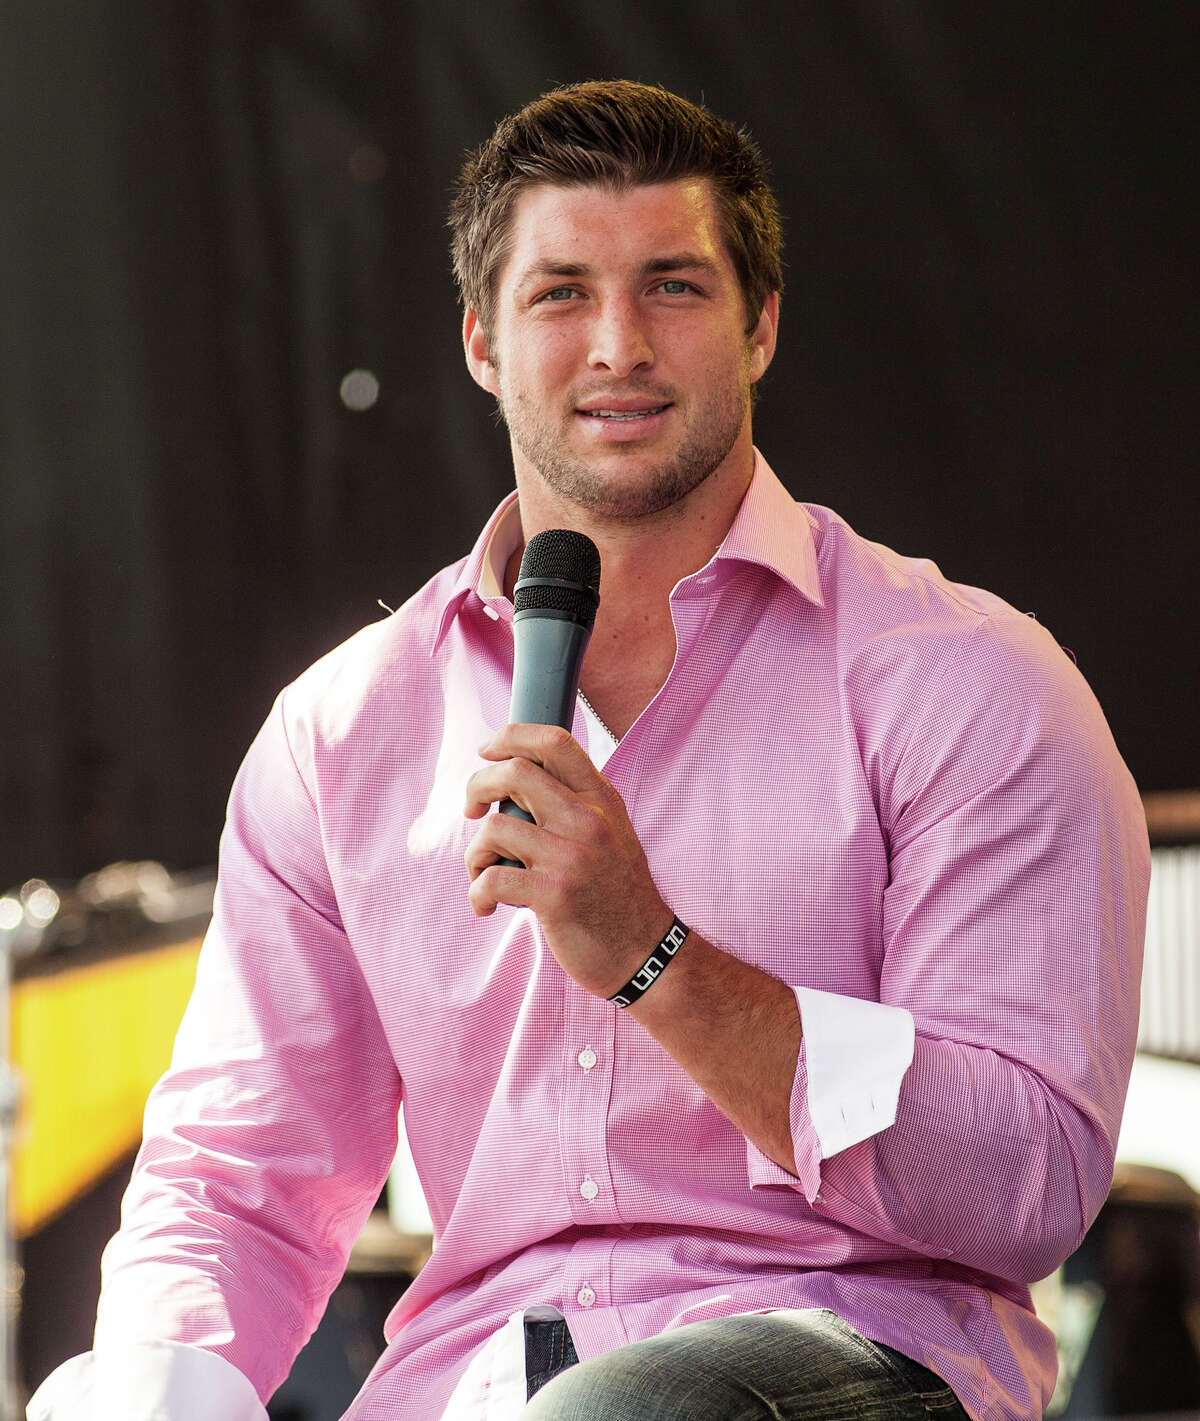 New York Jets quarterback Tim Tebow speaks Celebration Church's "Easter on the Hill" in Georgetown, Texas, on Easter Sunday, April 8, 2012.